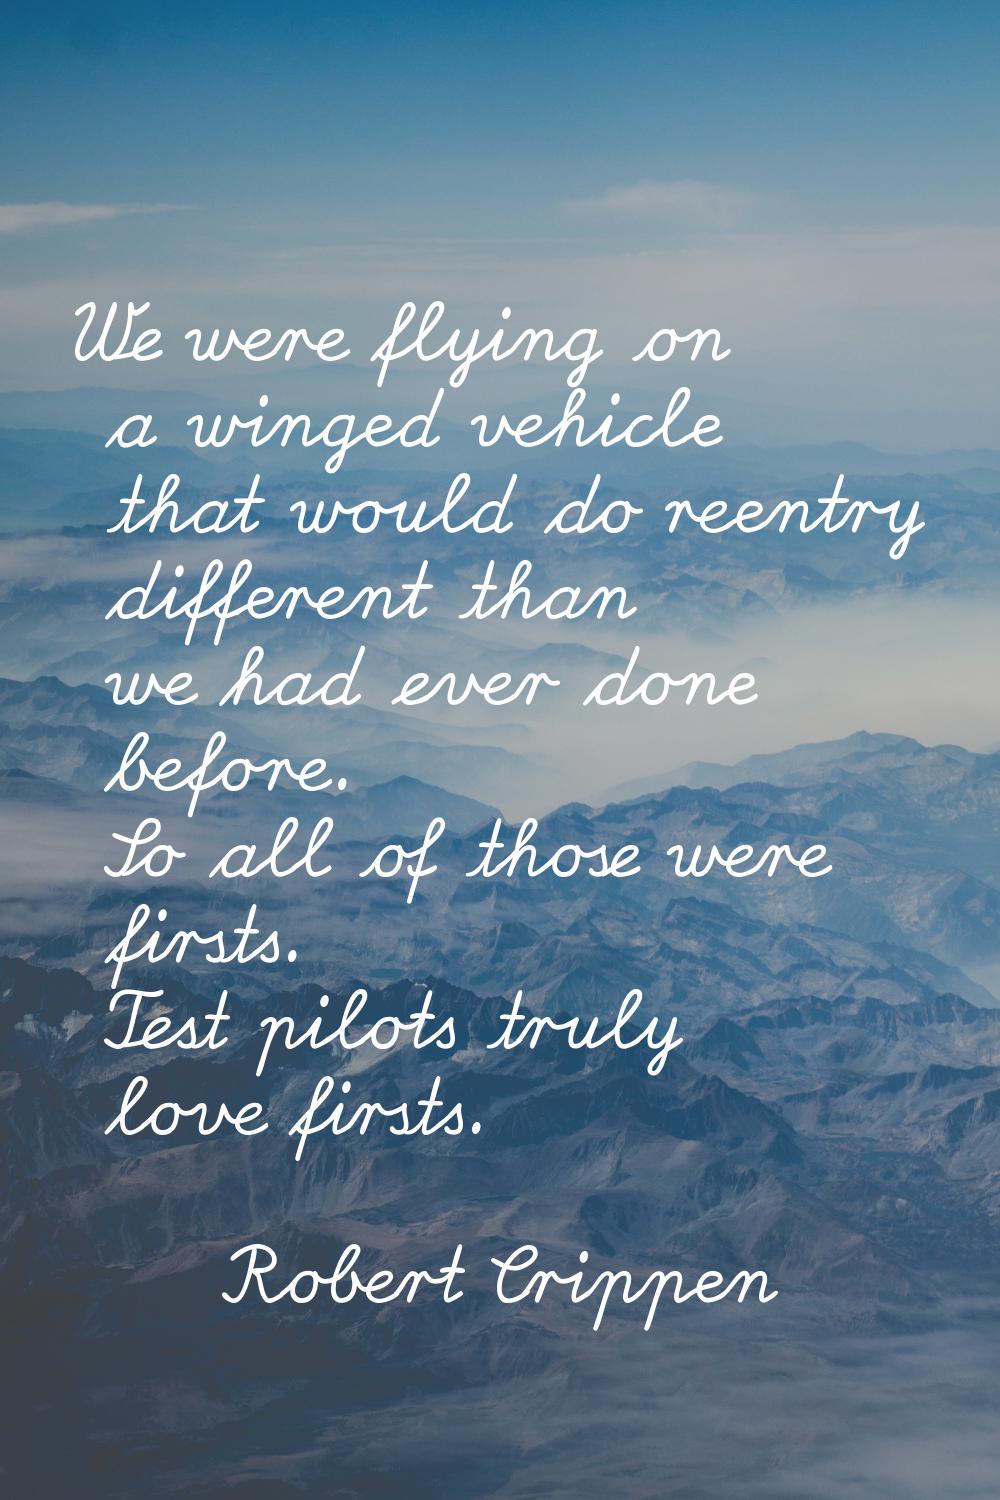 We were flying on a winged vehicle that would do reentry different than we had ever done before. So